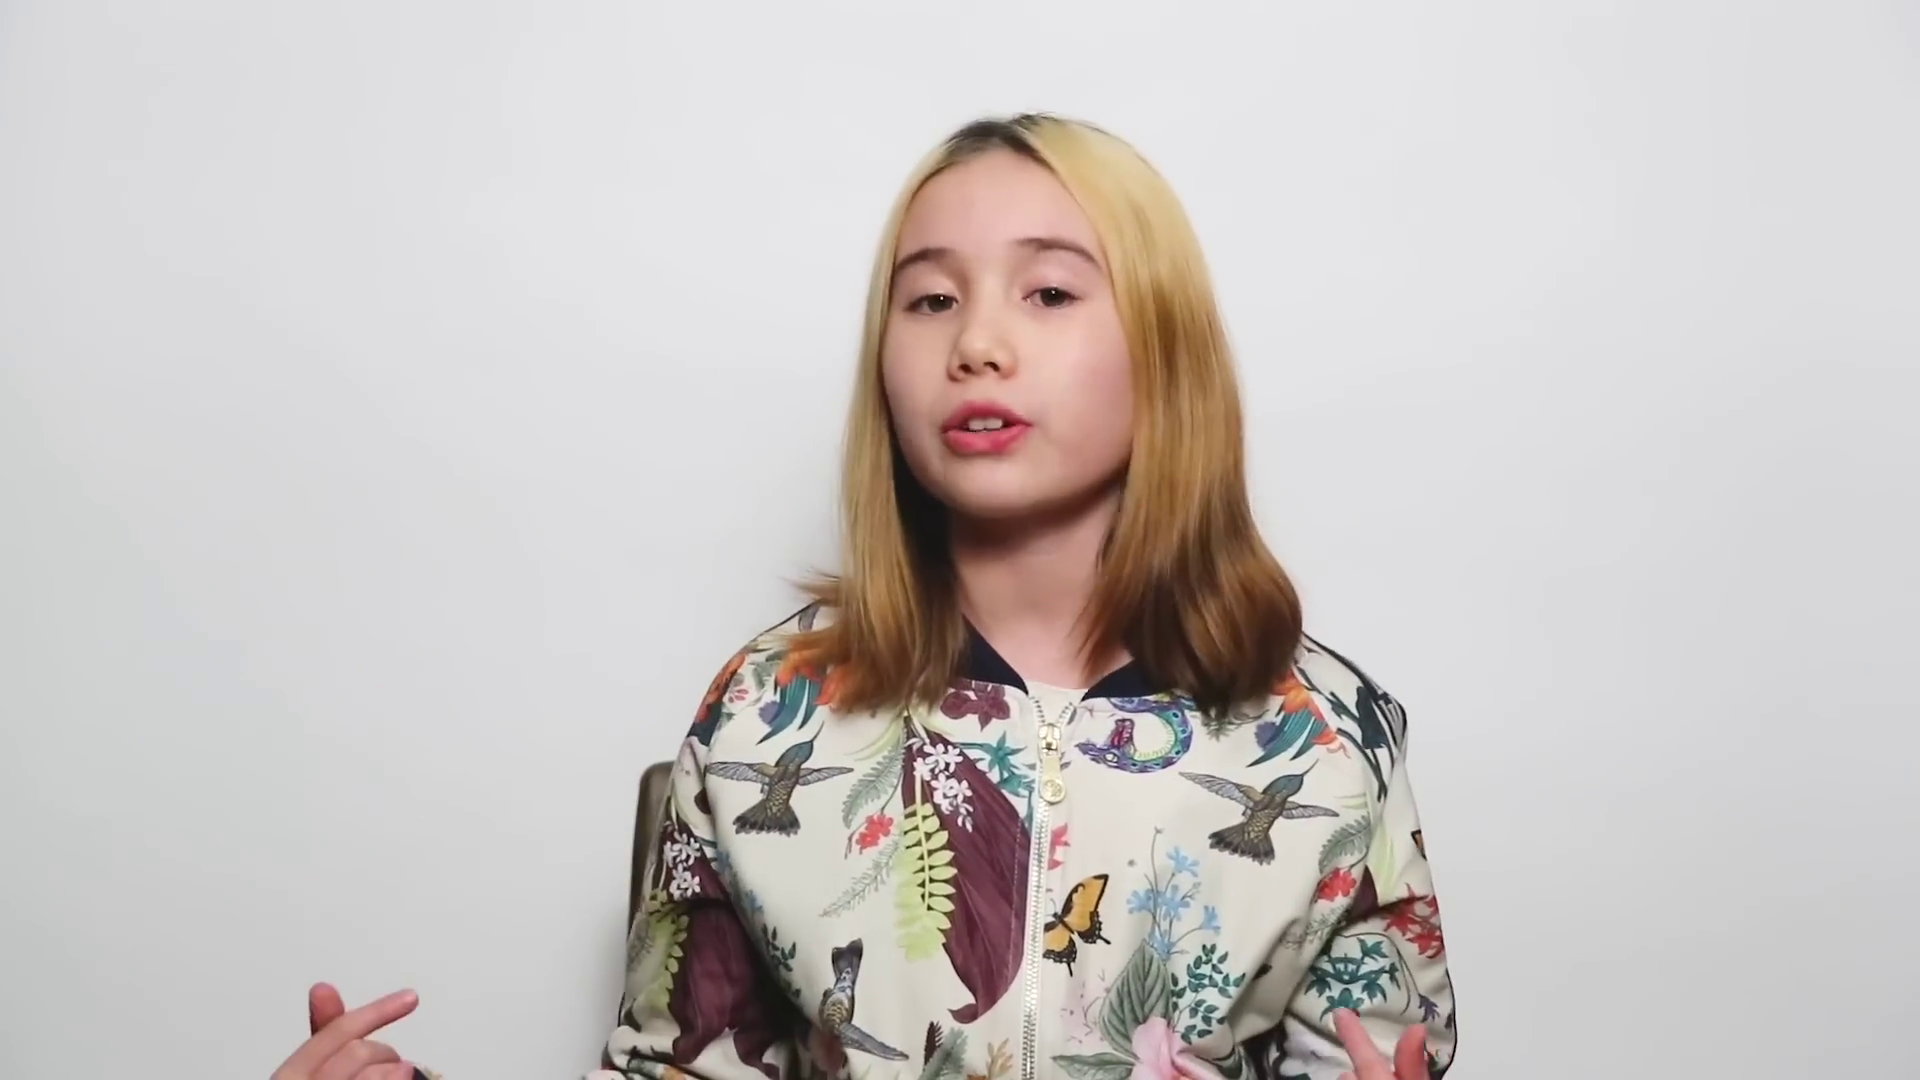 A still from a video of Lil Tay. She’s sitting in front of a white background. She’s younger in this video, around age 9 or 10. She’s looking off into the camera and gesturing with her hand. 